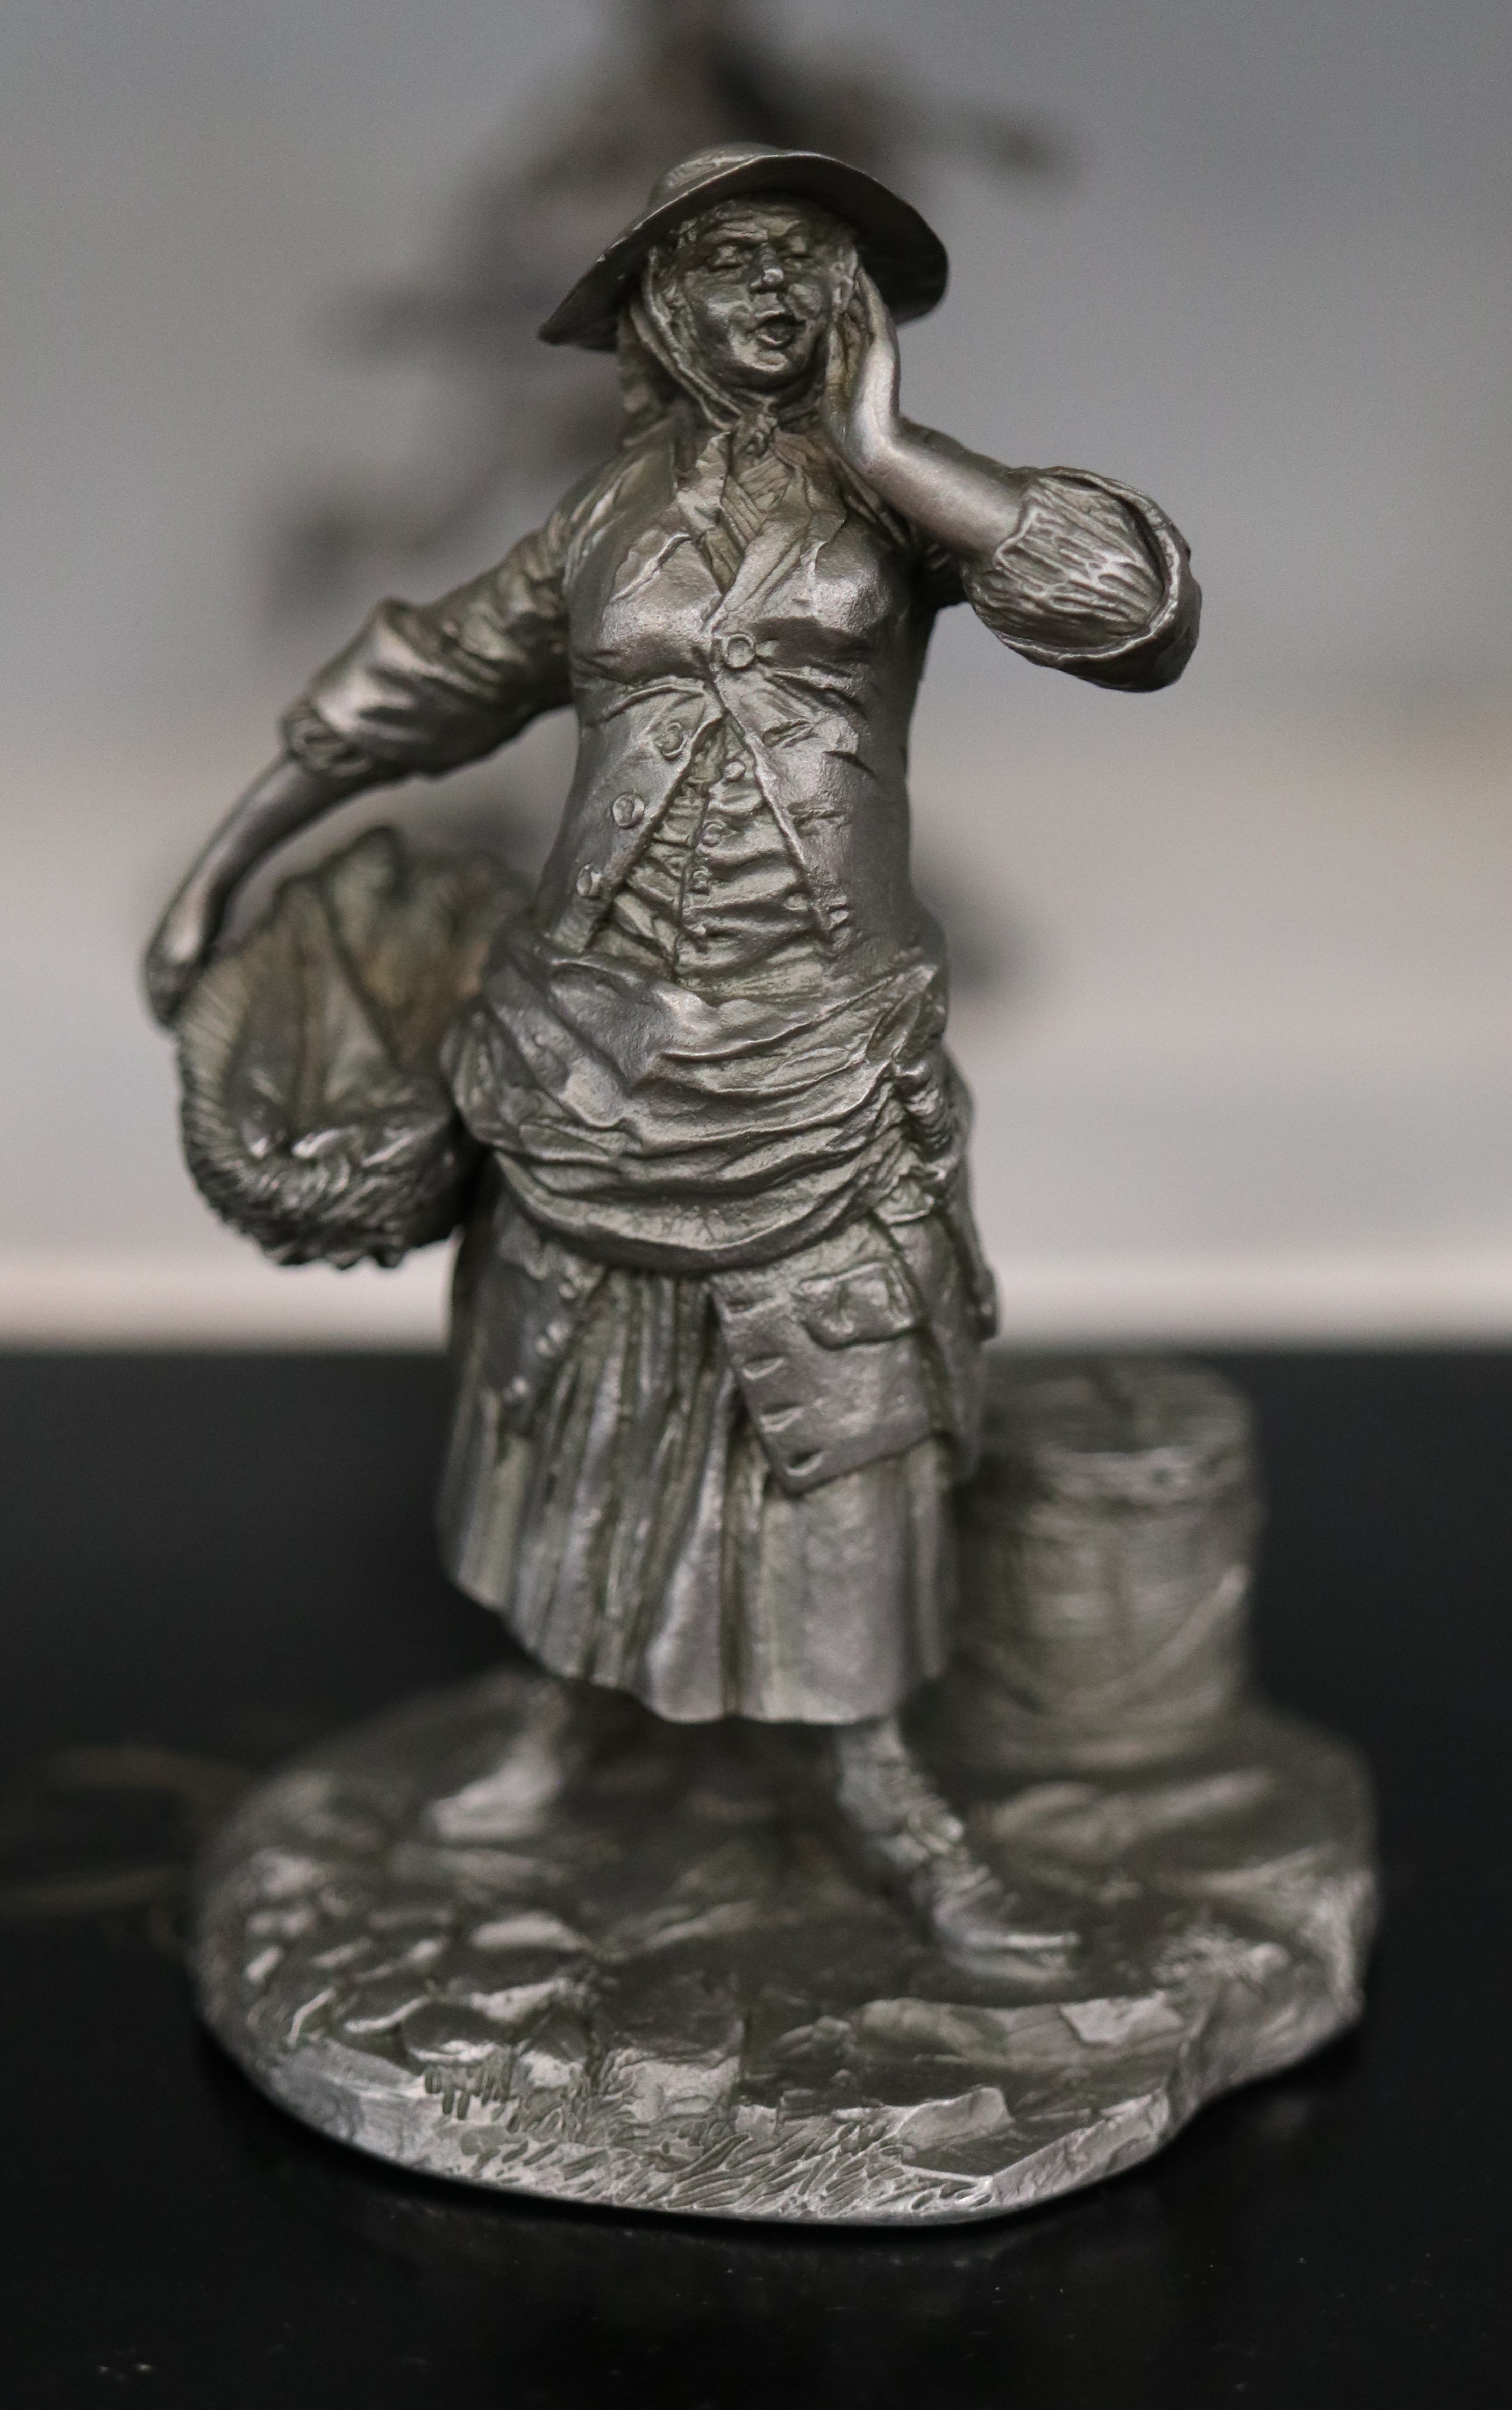 Complete collection of pewter figurines the Cries of London in original boxes - Image 11 of 13